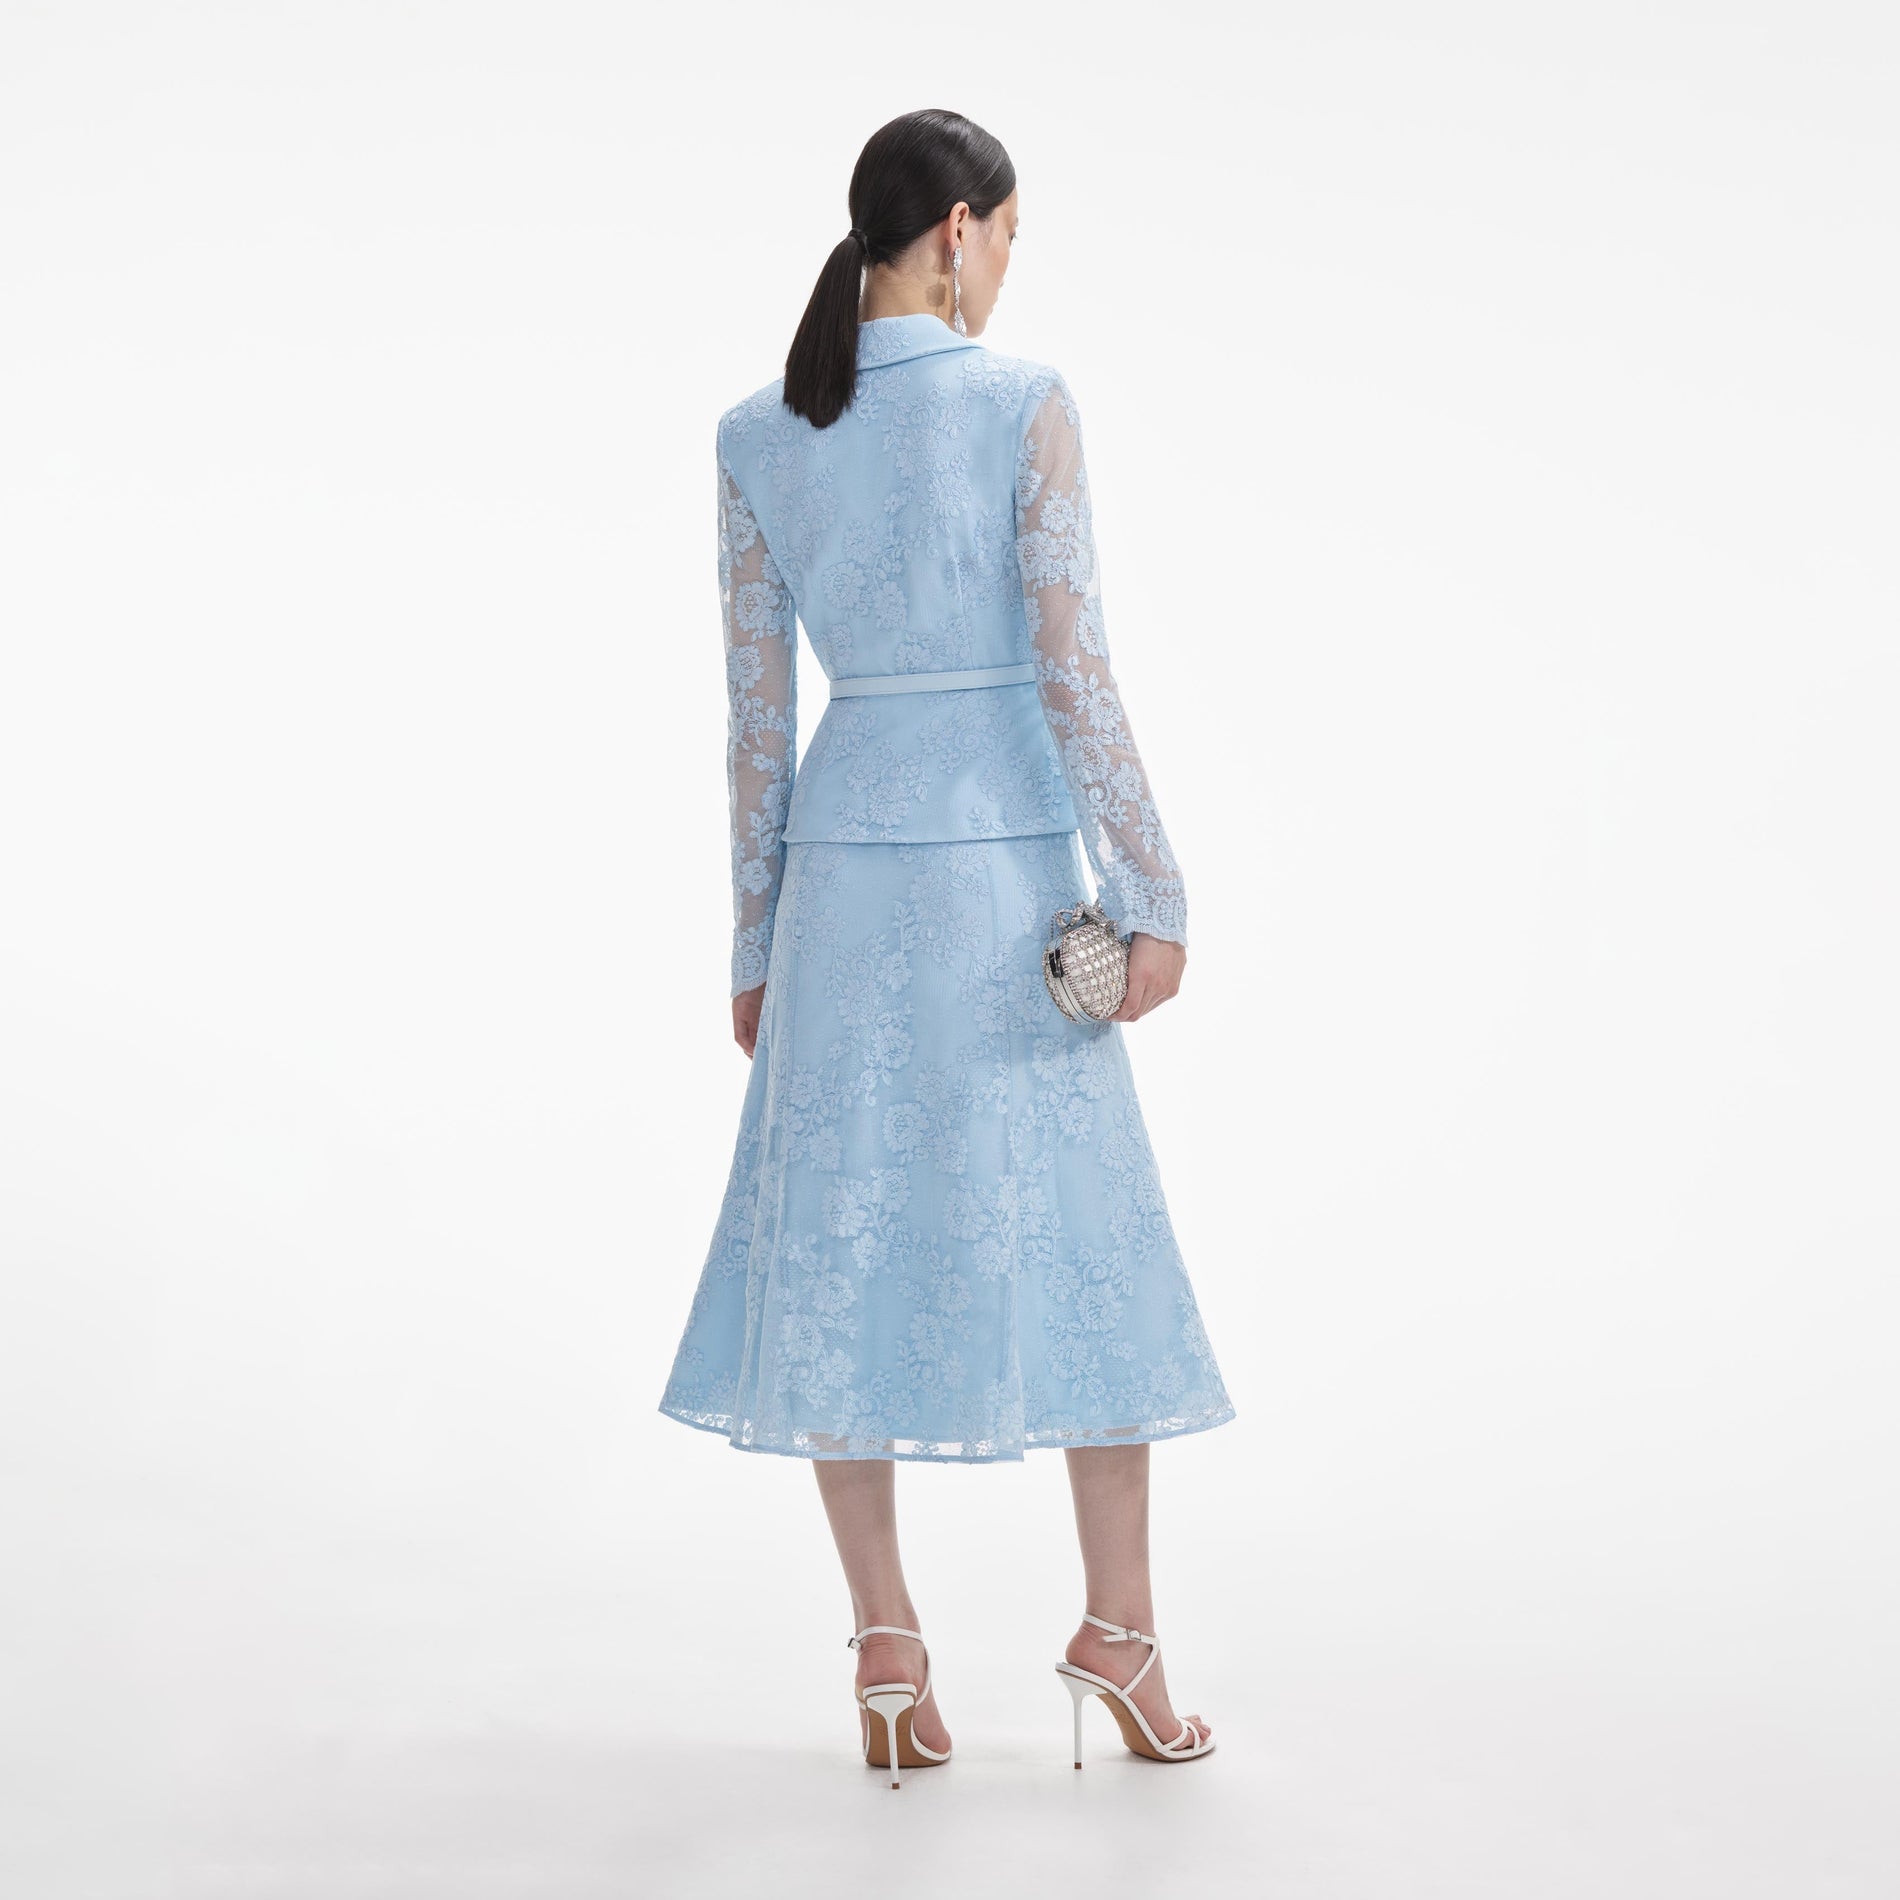 Back view of a woman wearing the White Blue Lace Tailored Midi Dress